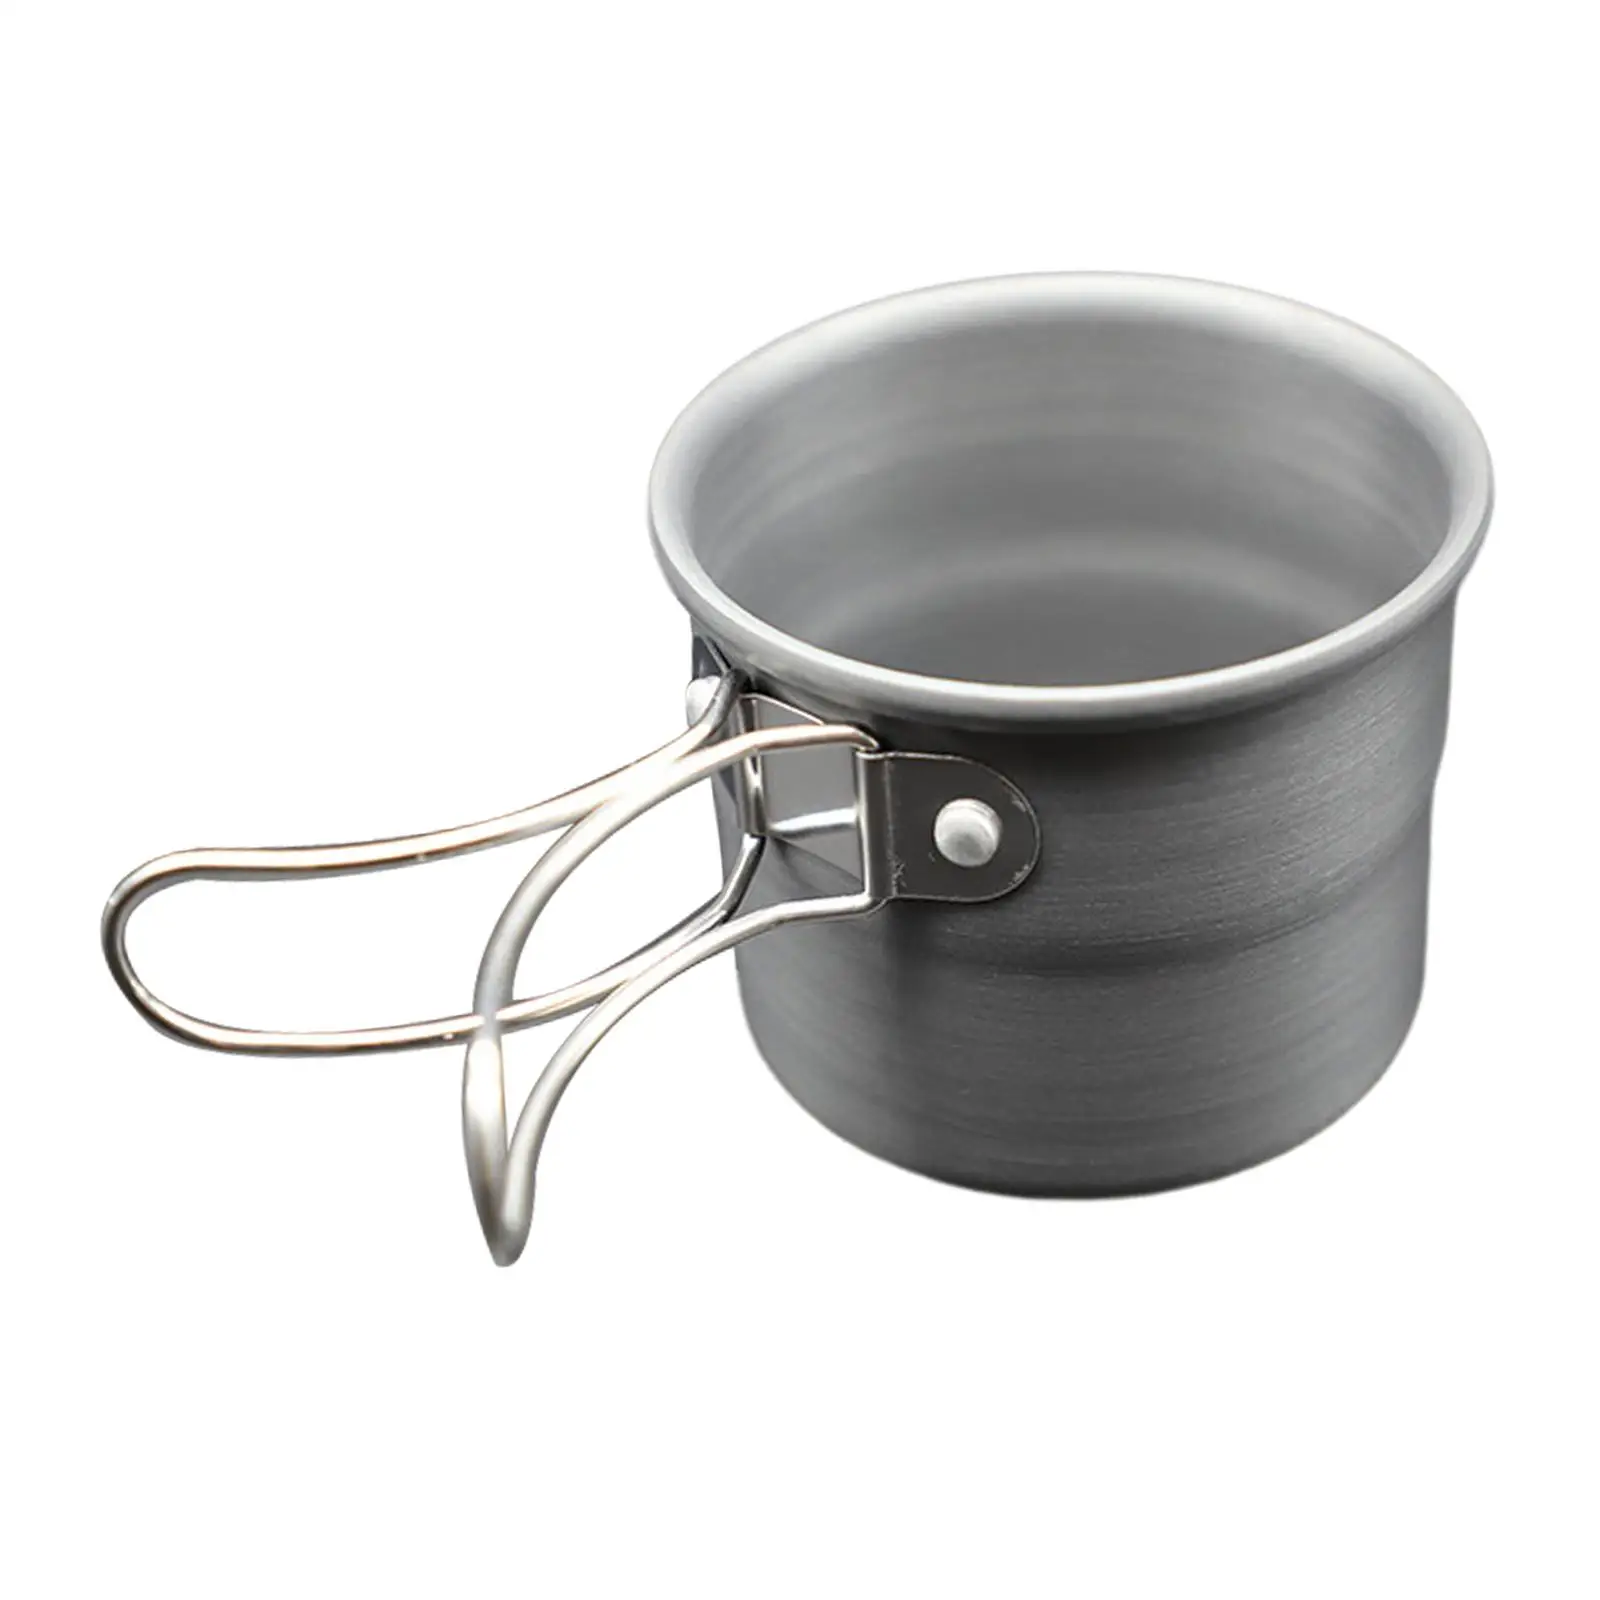 Camping Cup Water Cup with Folding Handles Pot Coffee Mug Aluminium Lightweight Portable for Outdoor Cooking Touring Trips